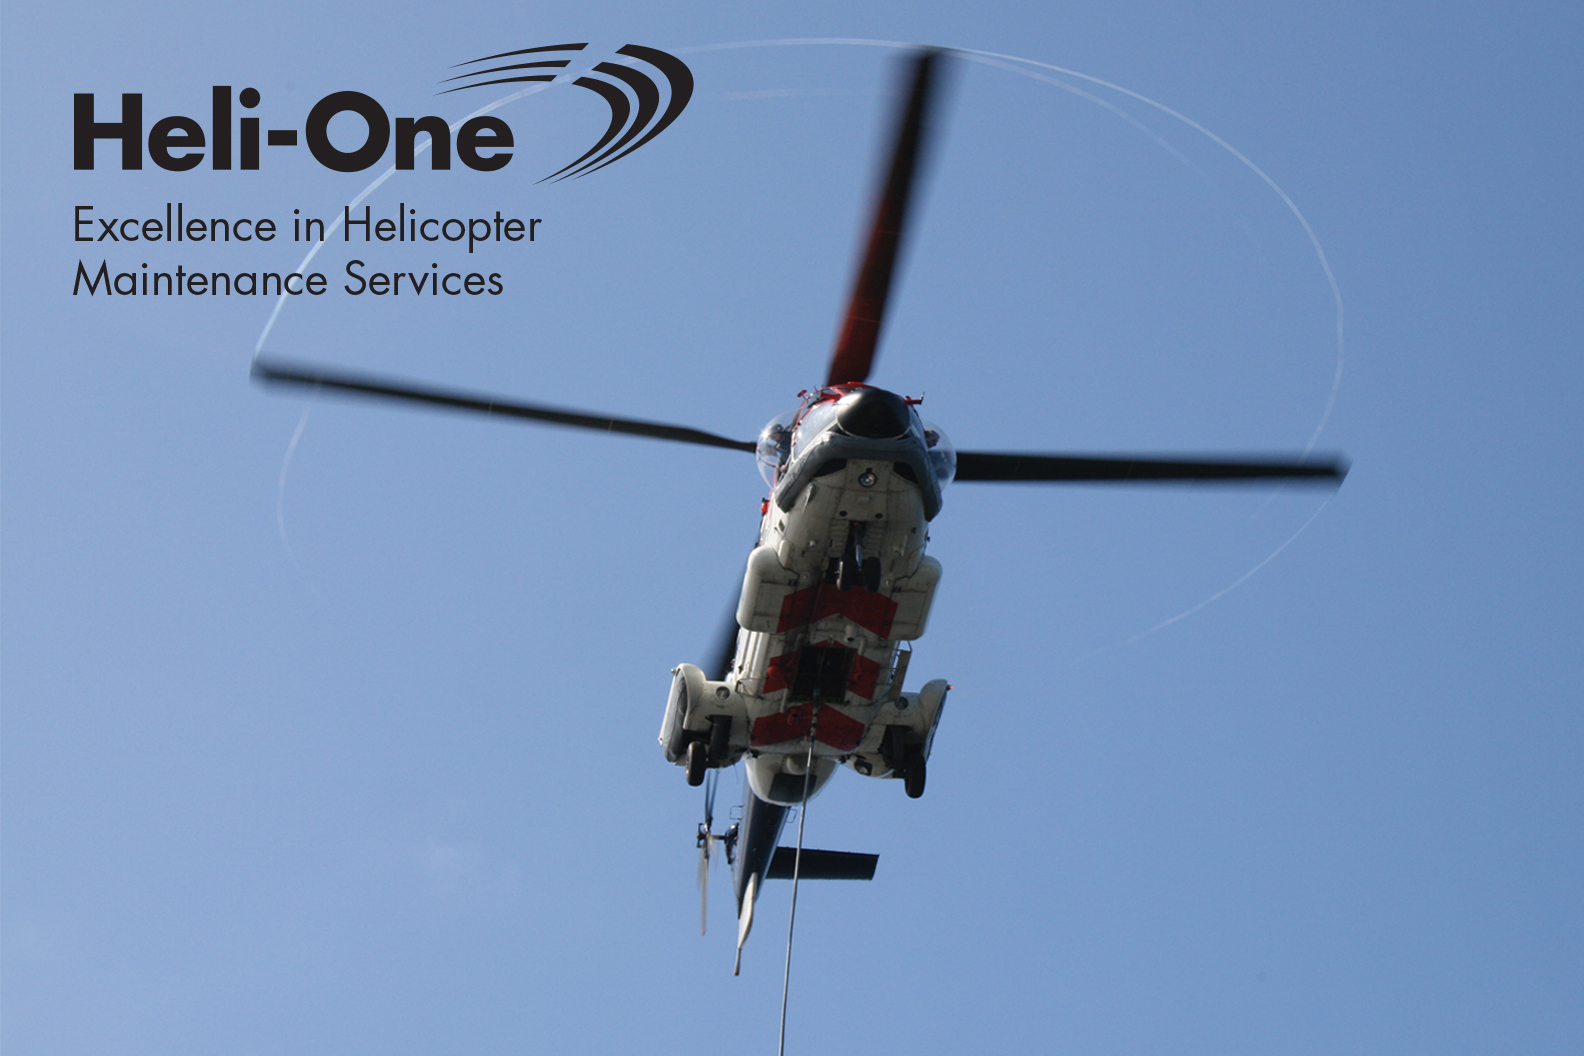 Heli-One's design team is developing a solution that will help improve reliability across a variety of conditions, provide reliable radar, and increase safety.